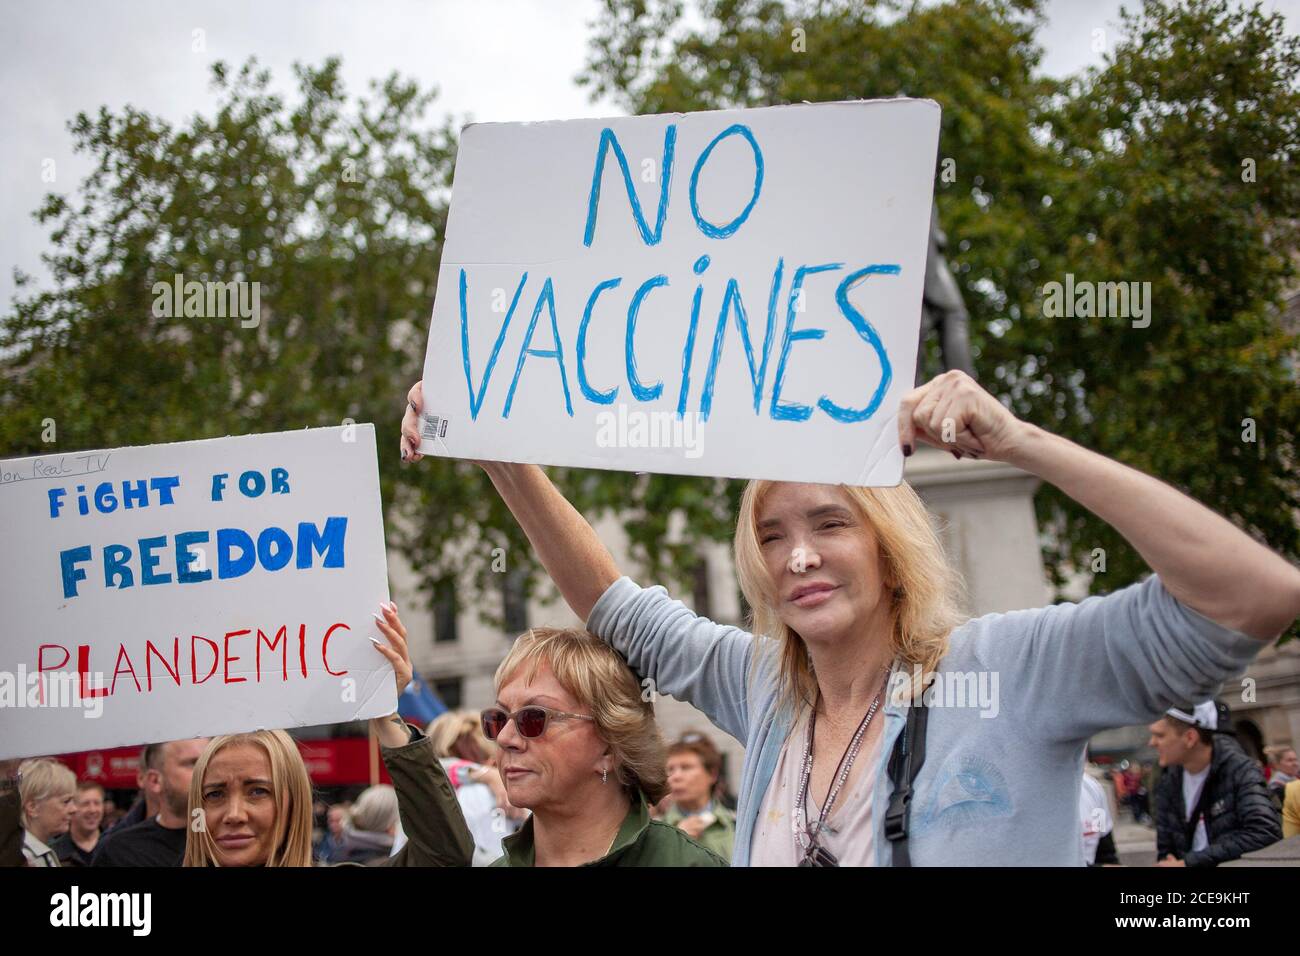 London, UK. 29th August 2020. A middle-aged blonde woman holds up a ‘No Vaccines’ banner. Unite for Freedom demonstration, Trafalgar Square. Stock Photo